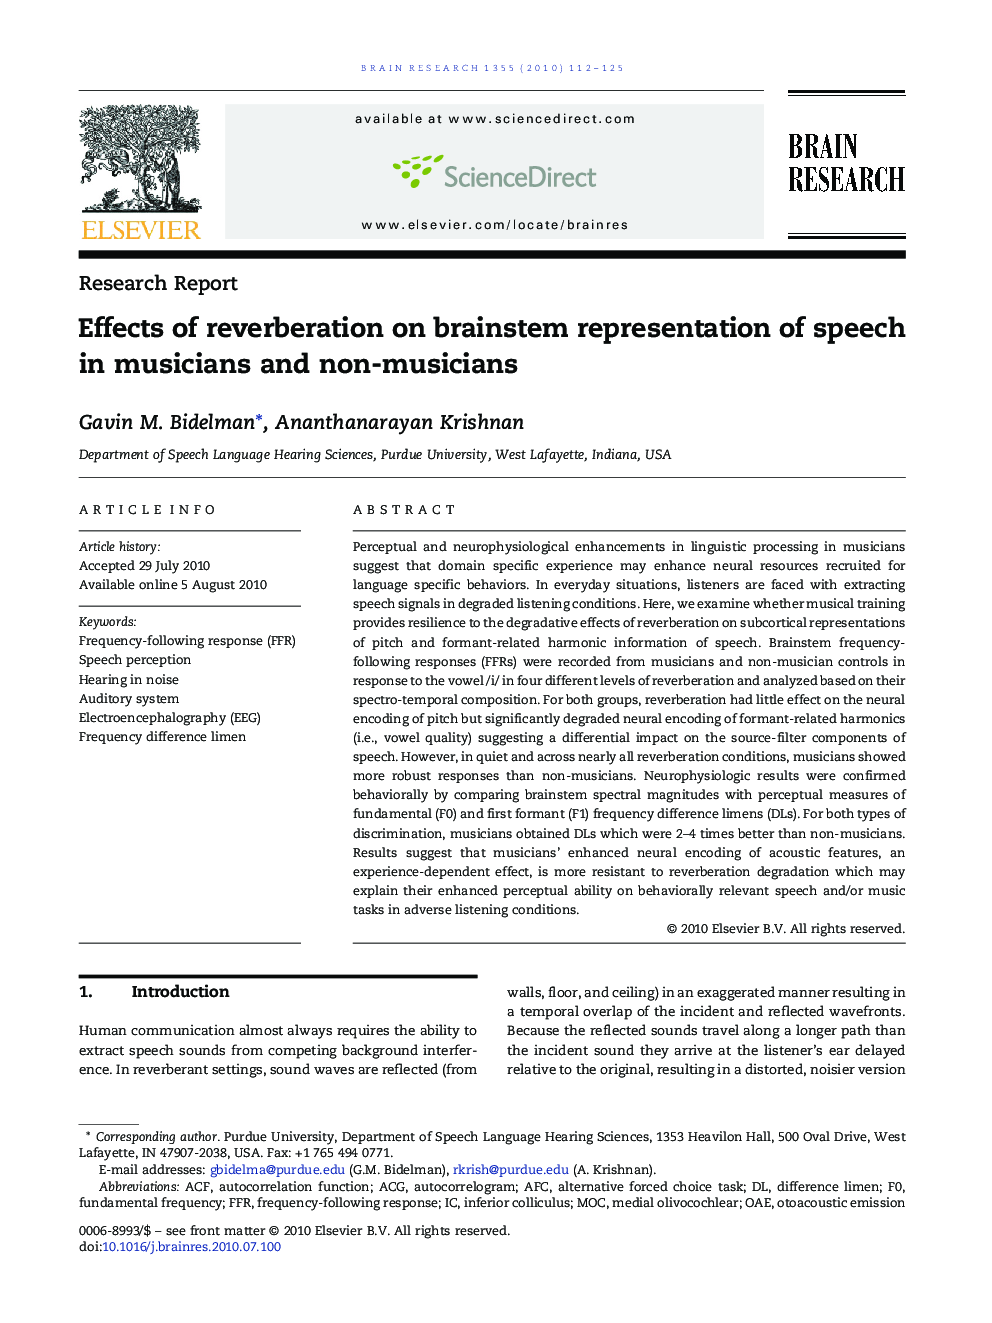 Effects of reverberation on brainstem representation of speech in musicians and non-musicians